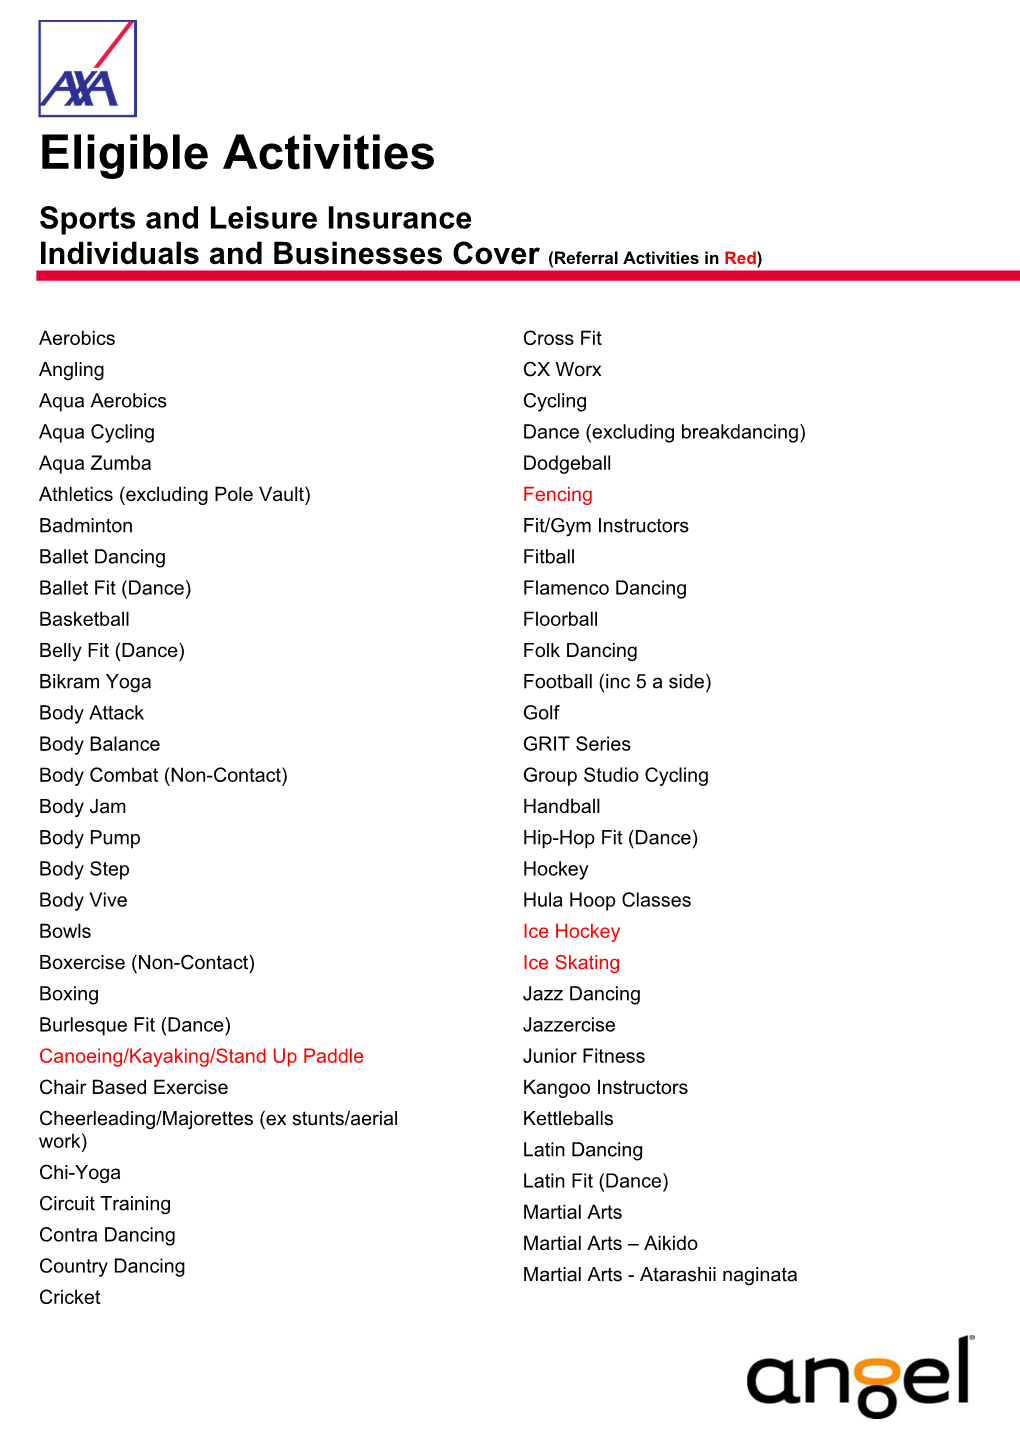 Eligible Activities Sports and Leisure Insurance Individuals and Businesses Cover (Referral Activities in Red)